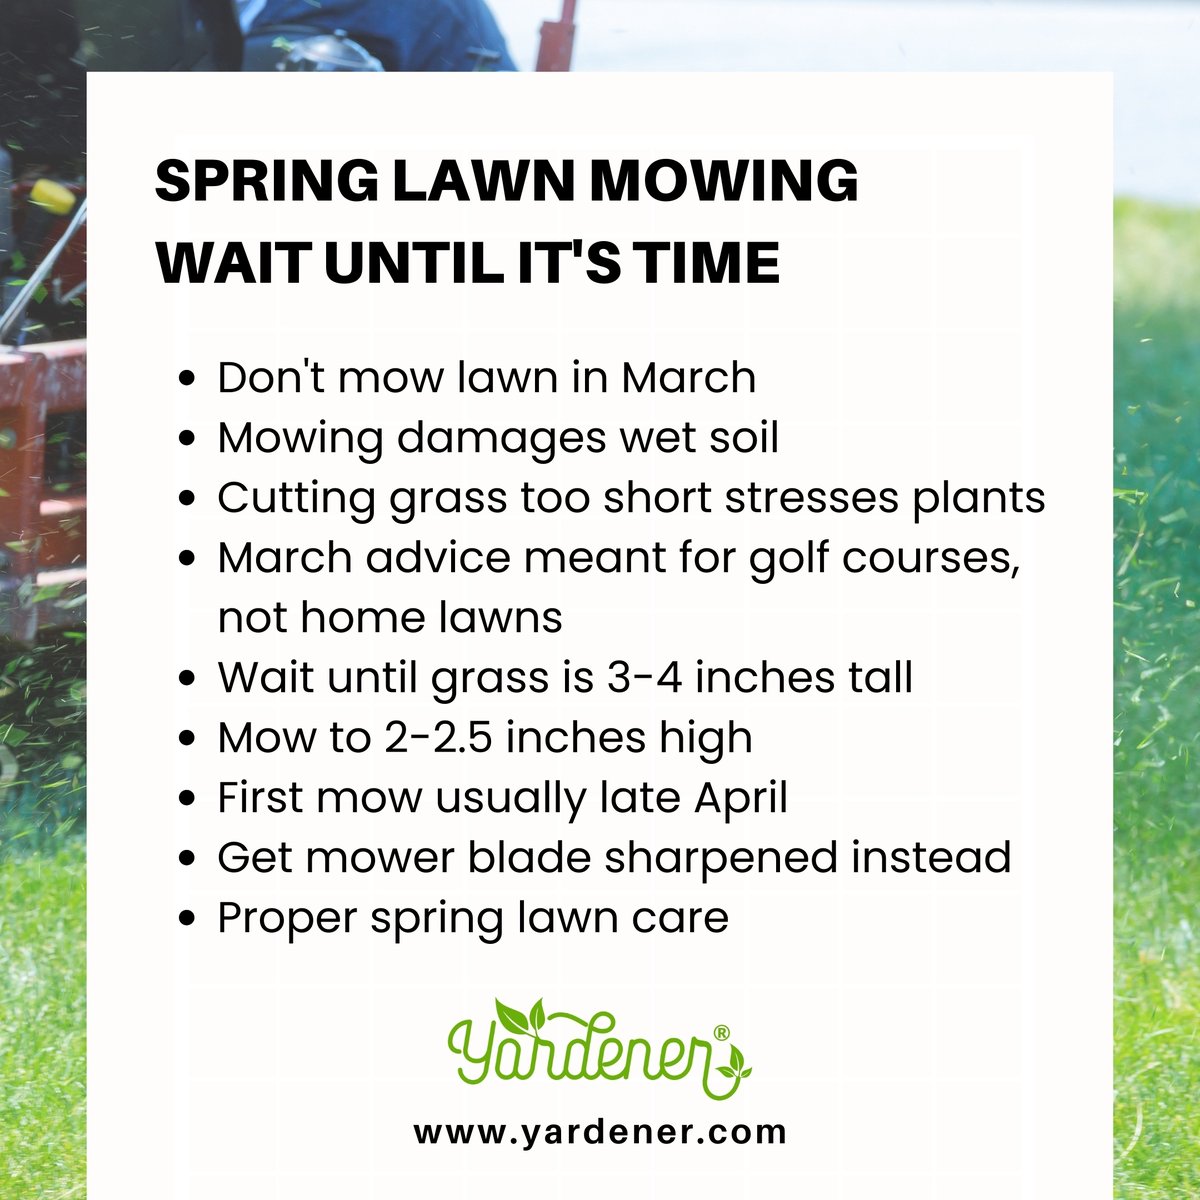 🚫 Mowing too early can damage your lawn! Get tips on perfect spring mowing timing.

#gardeningtips #gardeninggoals #GardenMagic #gardening #gardenblogger #plantcare #yardener #lawnmower #lawnmowingtips #LawnCareTips #lawncarecommunity #mowingthelawn